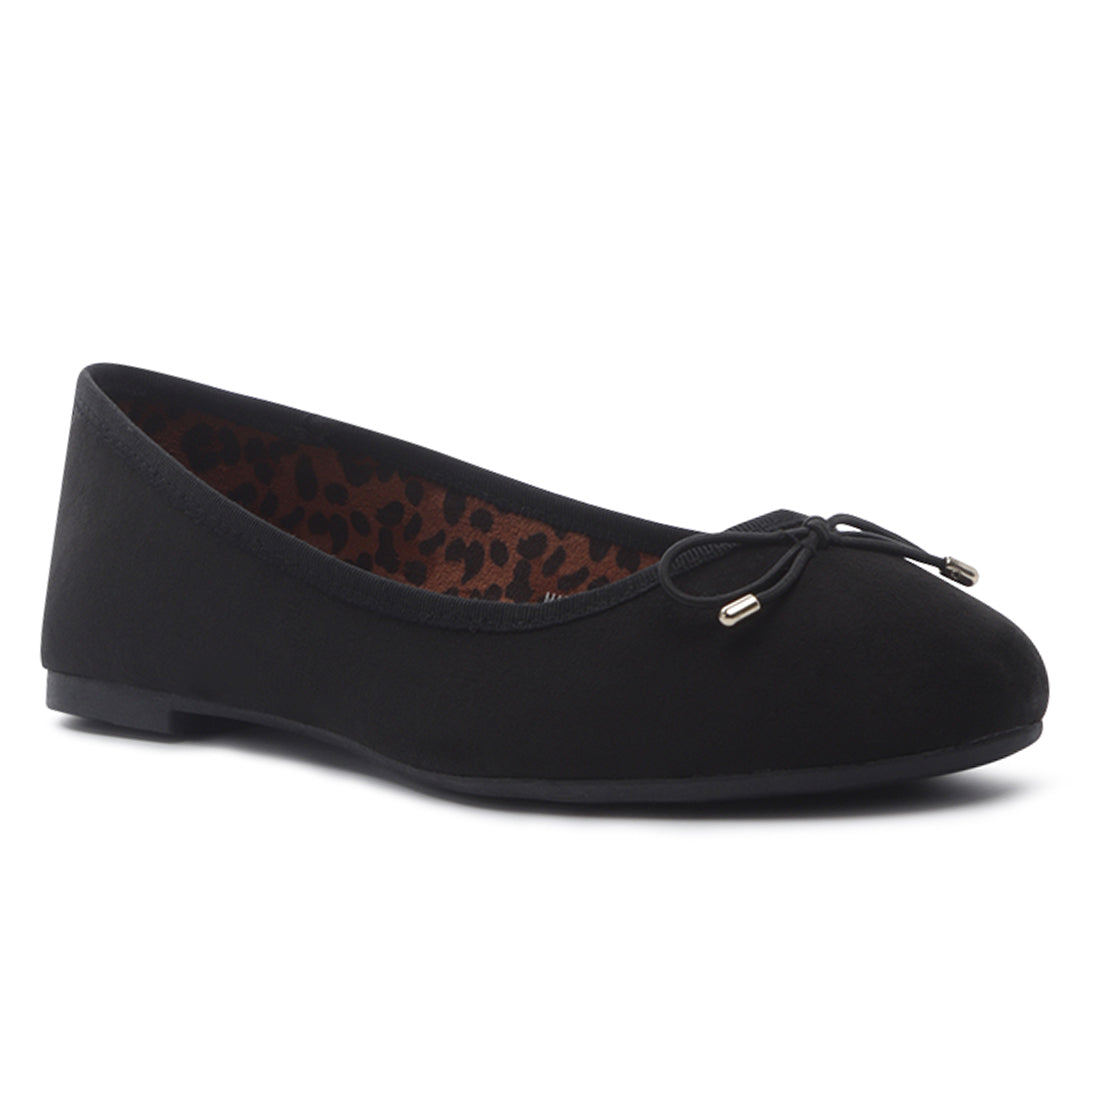 Ballerinas with Bow-Detailing - Black